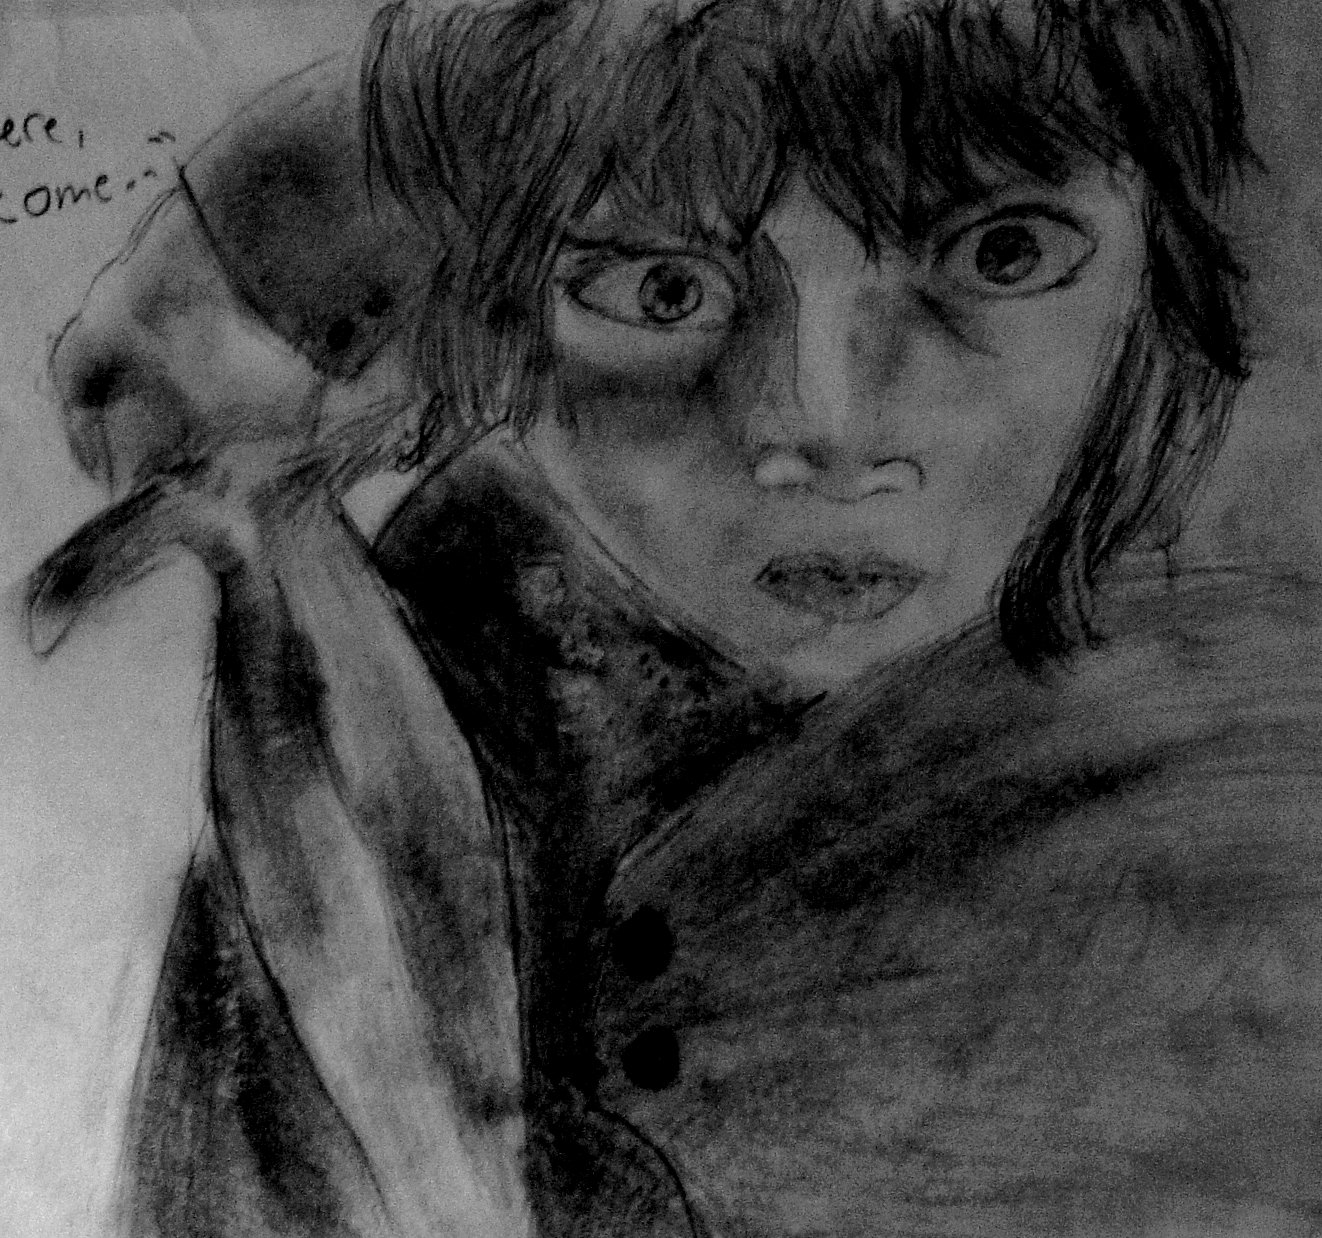 Frodo (finished) by Brighteyed